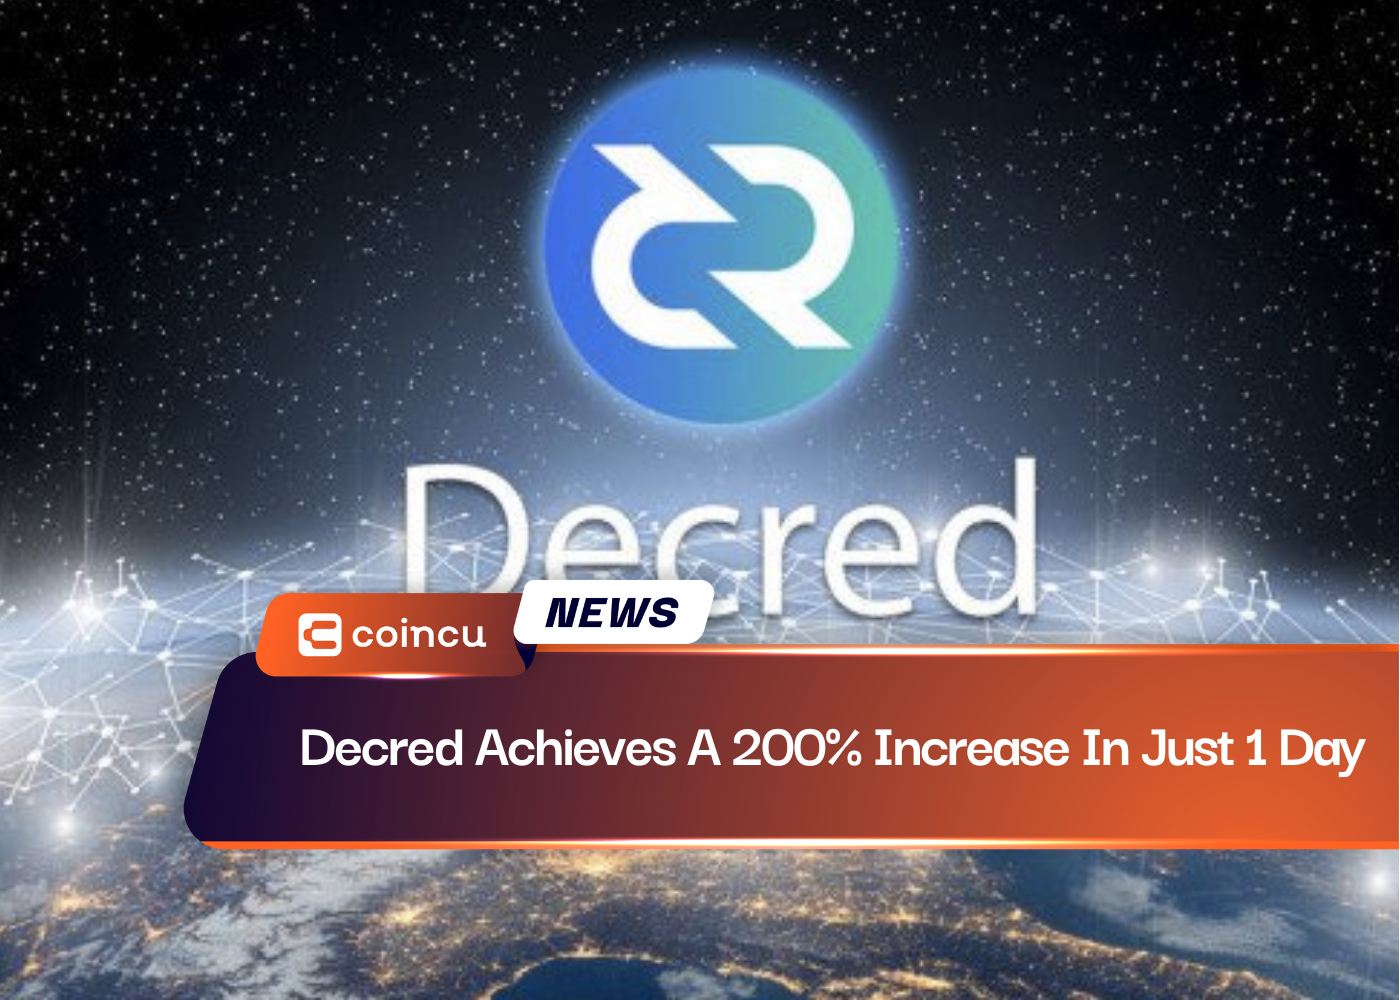 Decred Achieves A 200% Increase In Just 1 Day